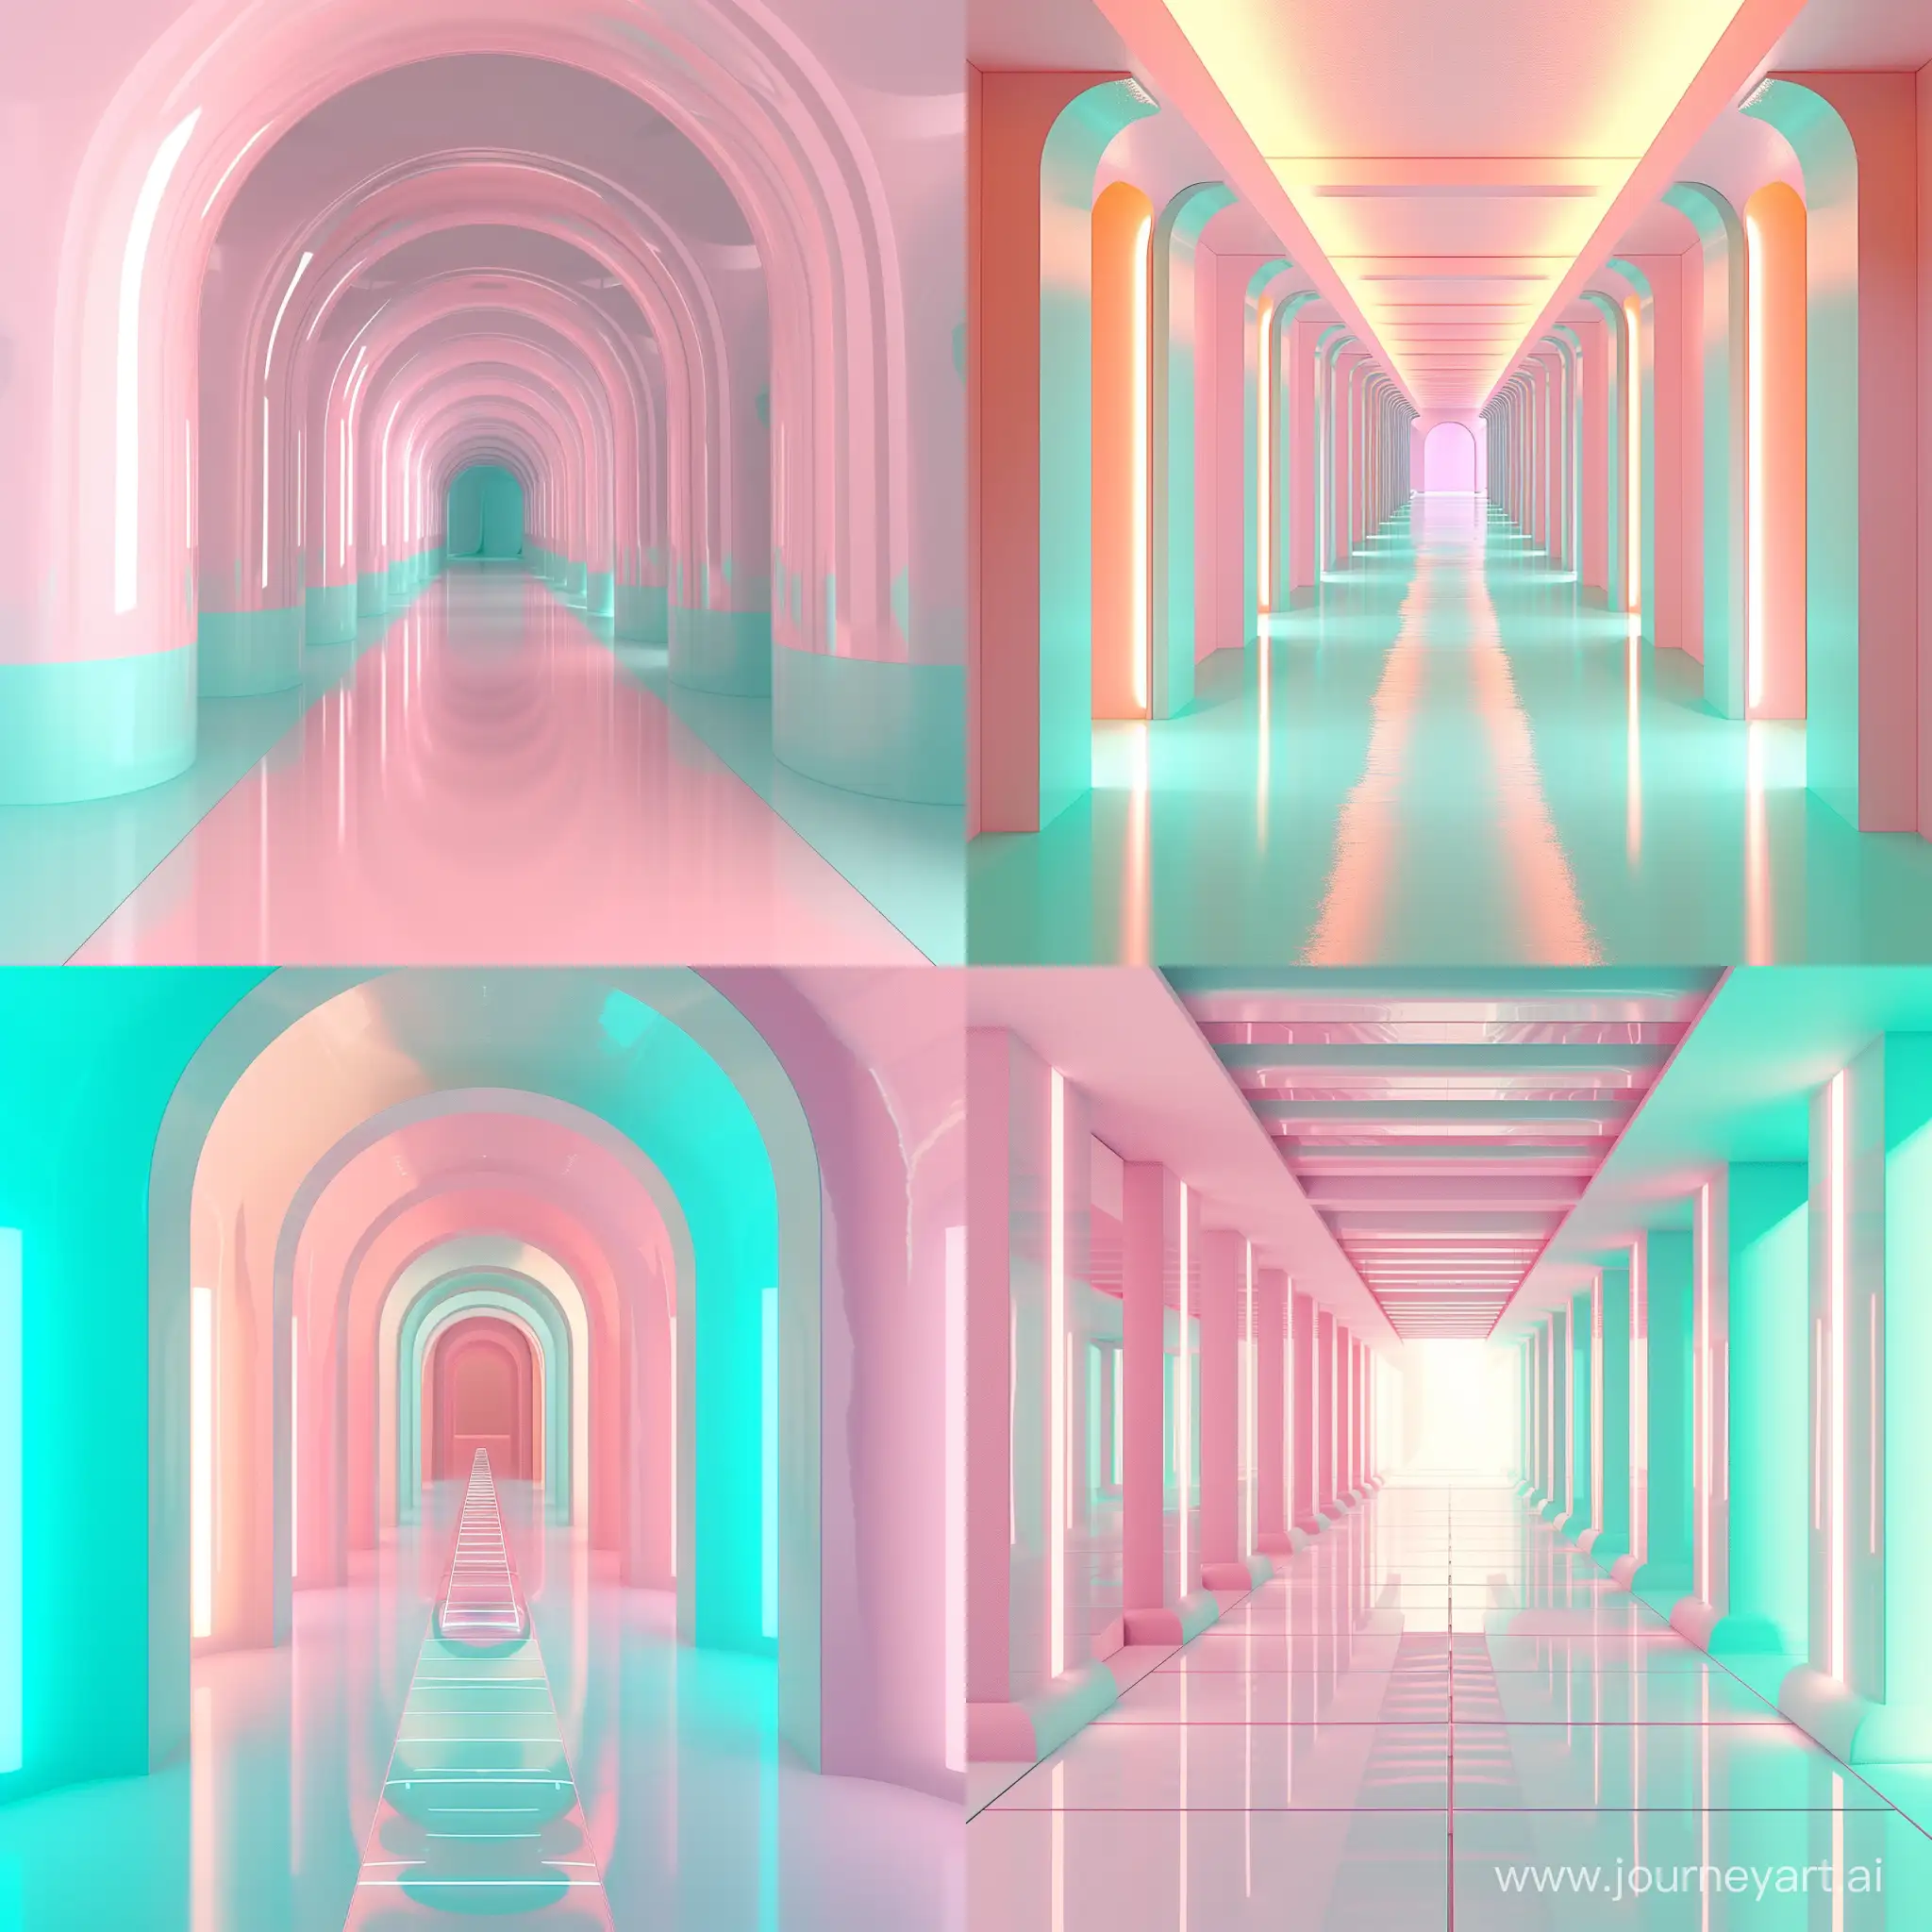 Futuristic-Pastel-Corridor-Photorealistic-Liminal-Space-in-Pink-and-Turquoise